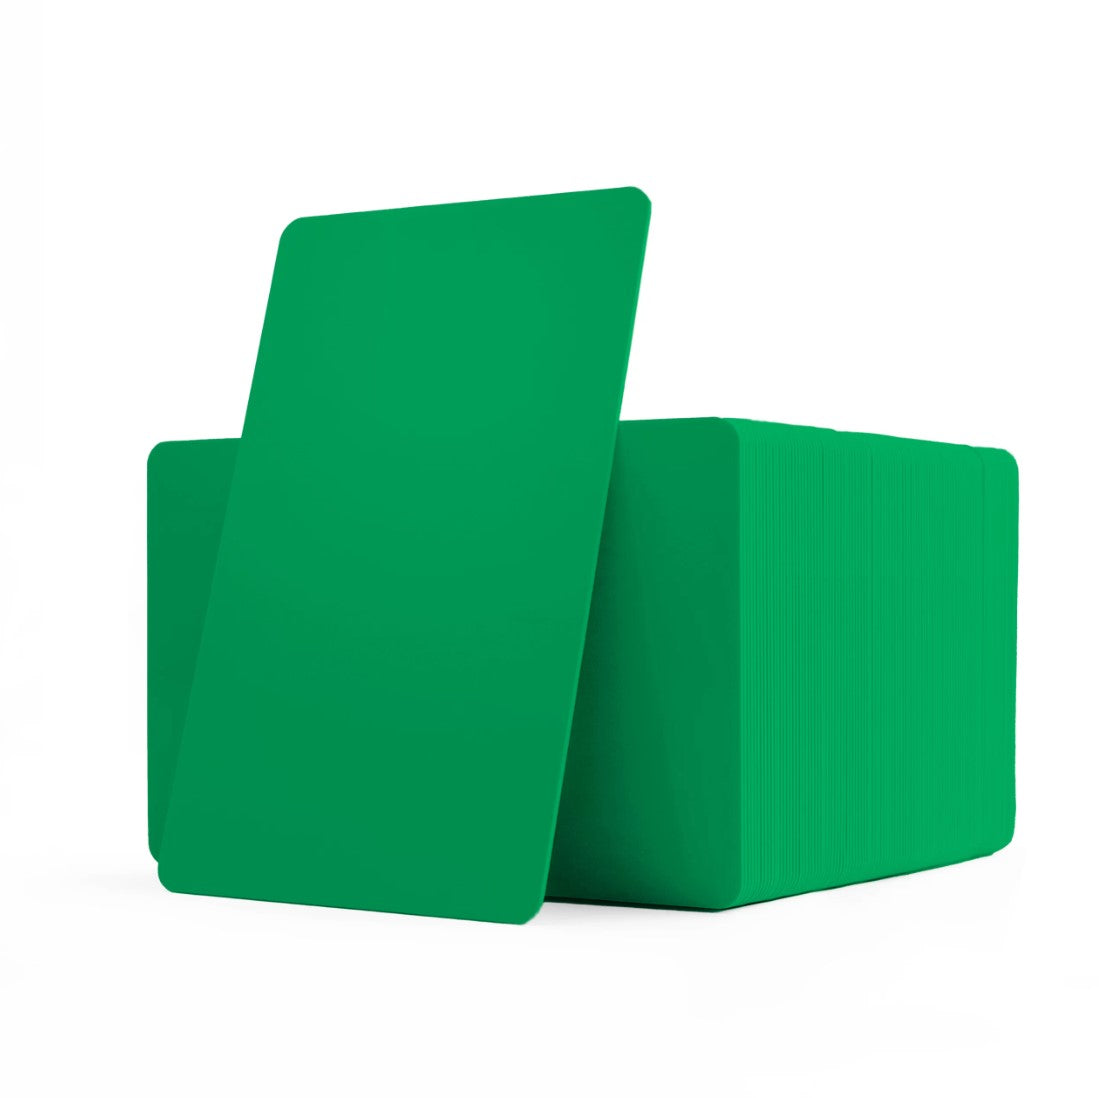 PVC CR80 Green Coloured Cards With Solid Core Coloured Edges - 1 - 100